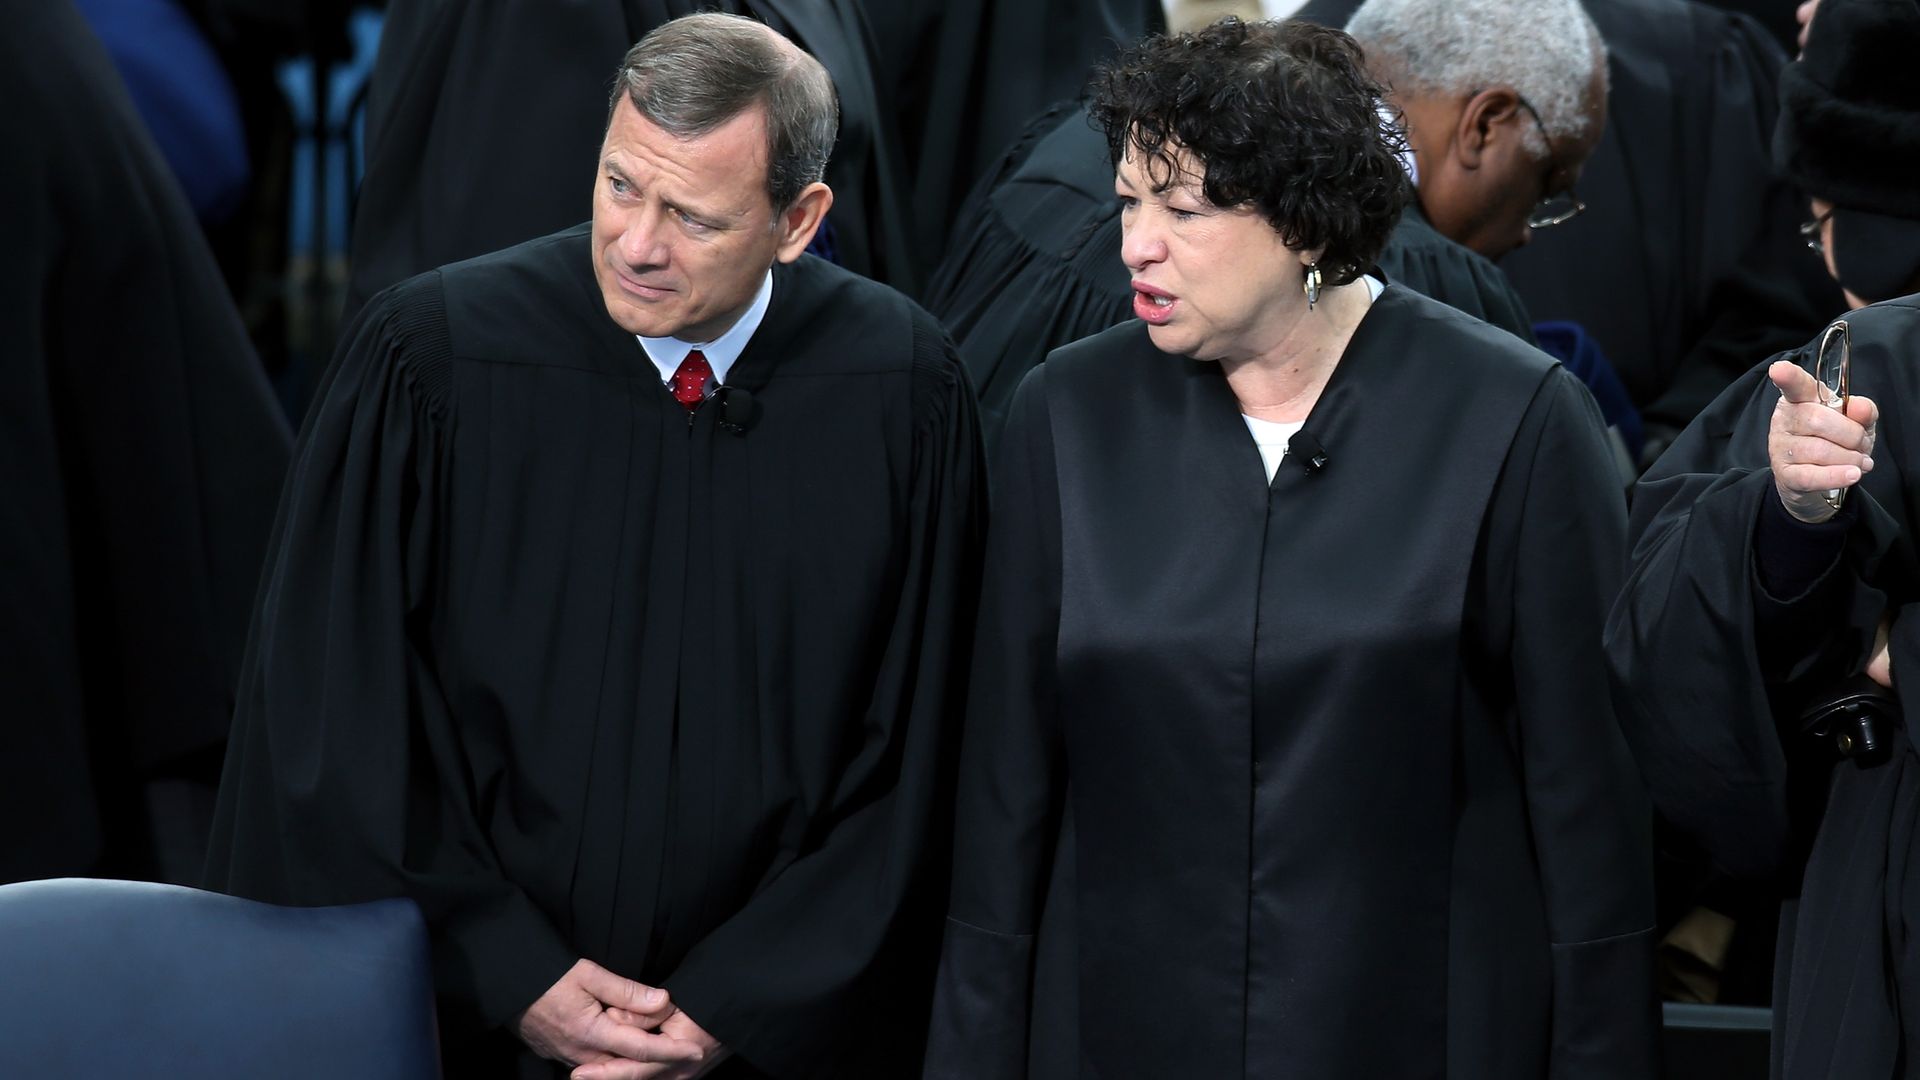 Chief Justice John Roberts and Justice Sonia Sotomayor in 2013